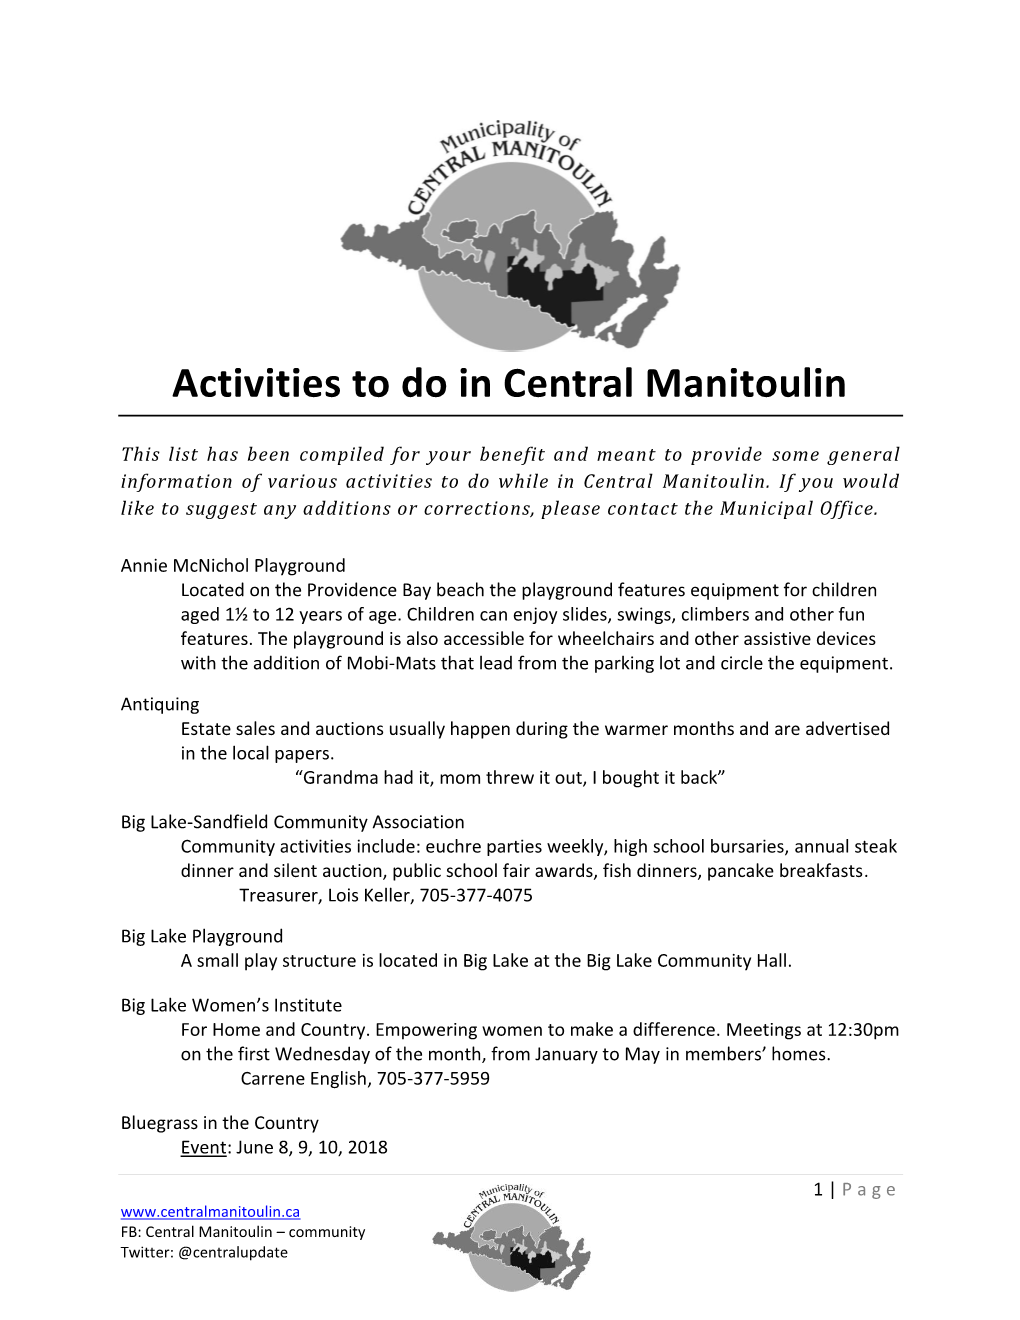 Activities to Do in Central Manitoulin